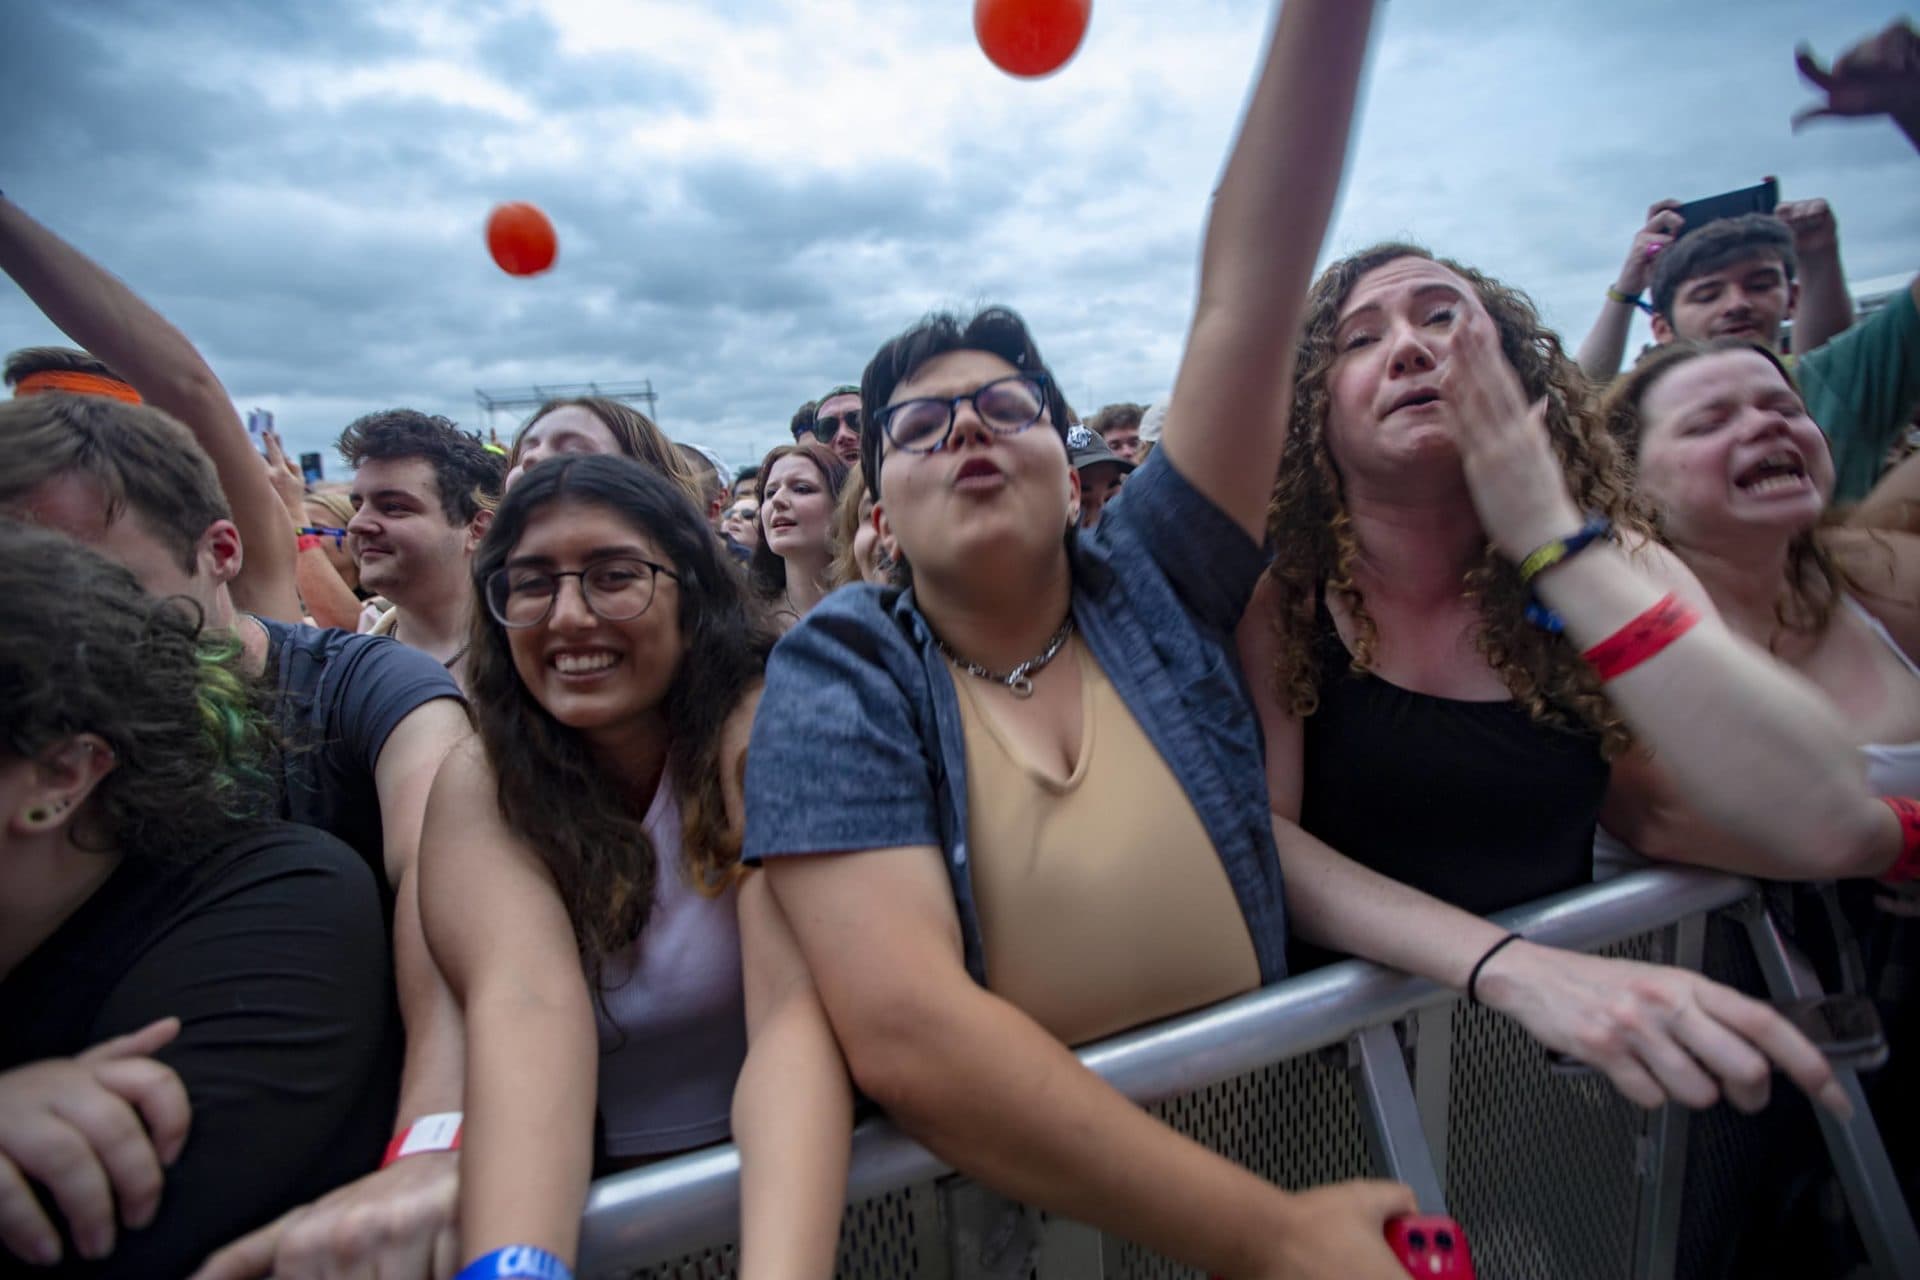 Avril Lavigne fans get excited during her performance at the Boston Calling Music Festival. (Jesse Costa/WBUR)